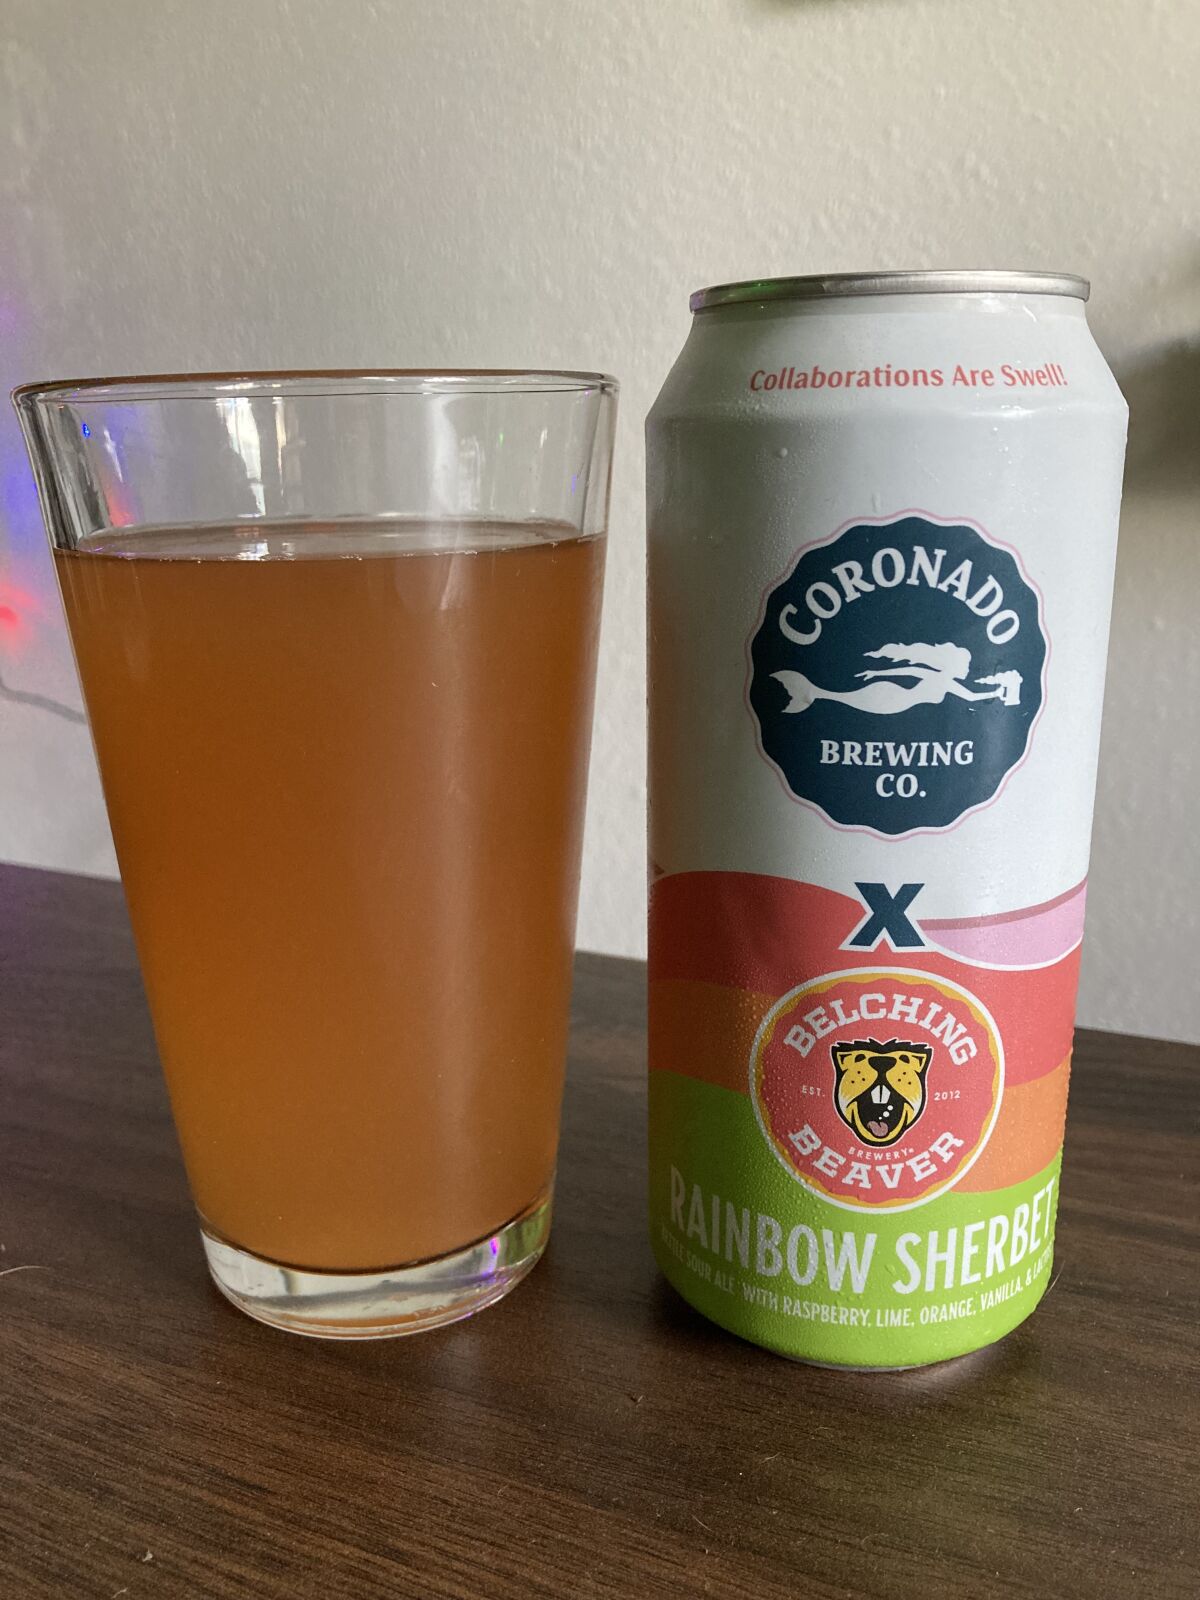 Rainbow Sherbet, a Kettle Style Sour from Coronado Brewing Co. and Belching Beaver Brewery.